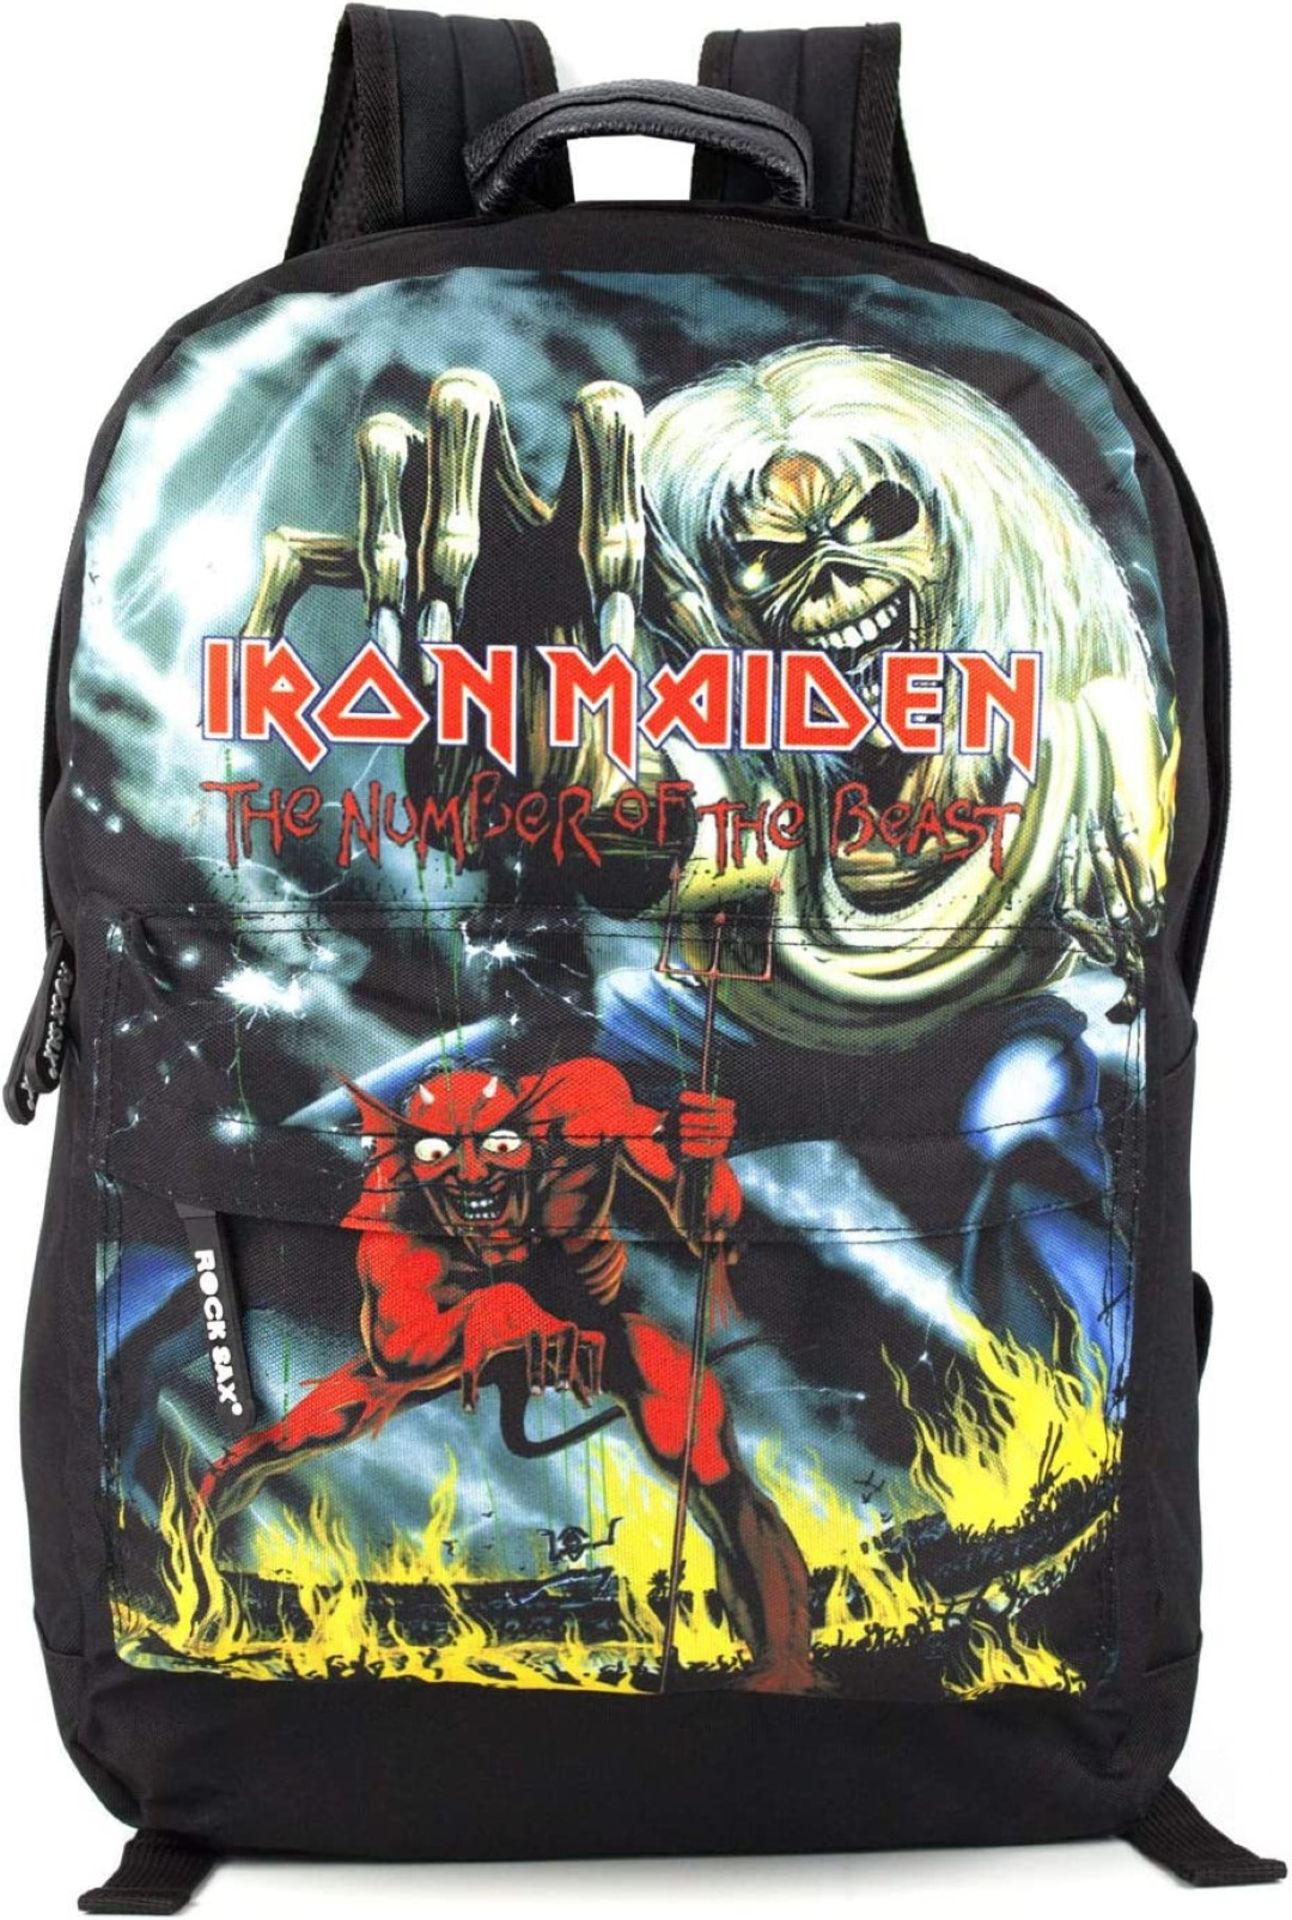 1 x Iron MaidenBackpack Bag by Rock Sax - Officially Licensed Merchandise - New & Unused - RRP £